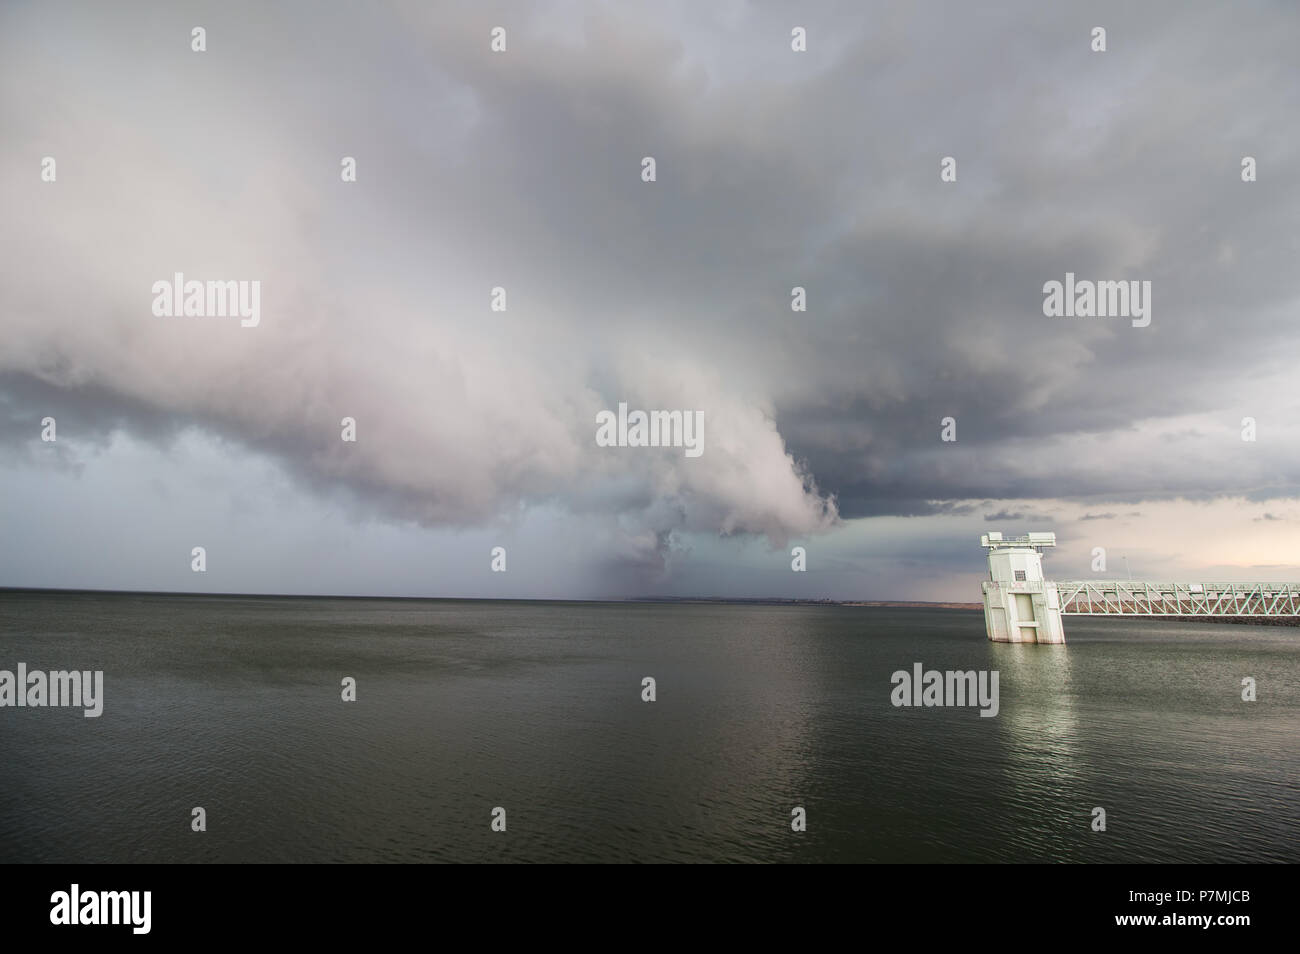 A severe storm and shelf cloud rapidly approach over a lake. Stock Photo